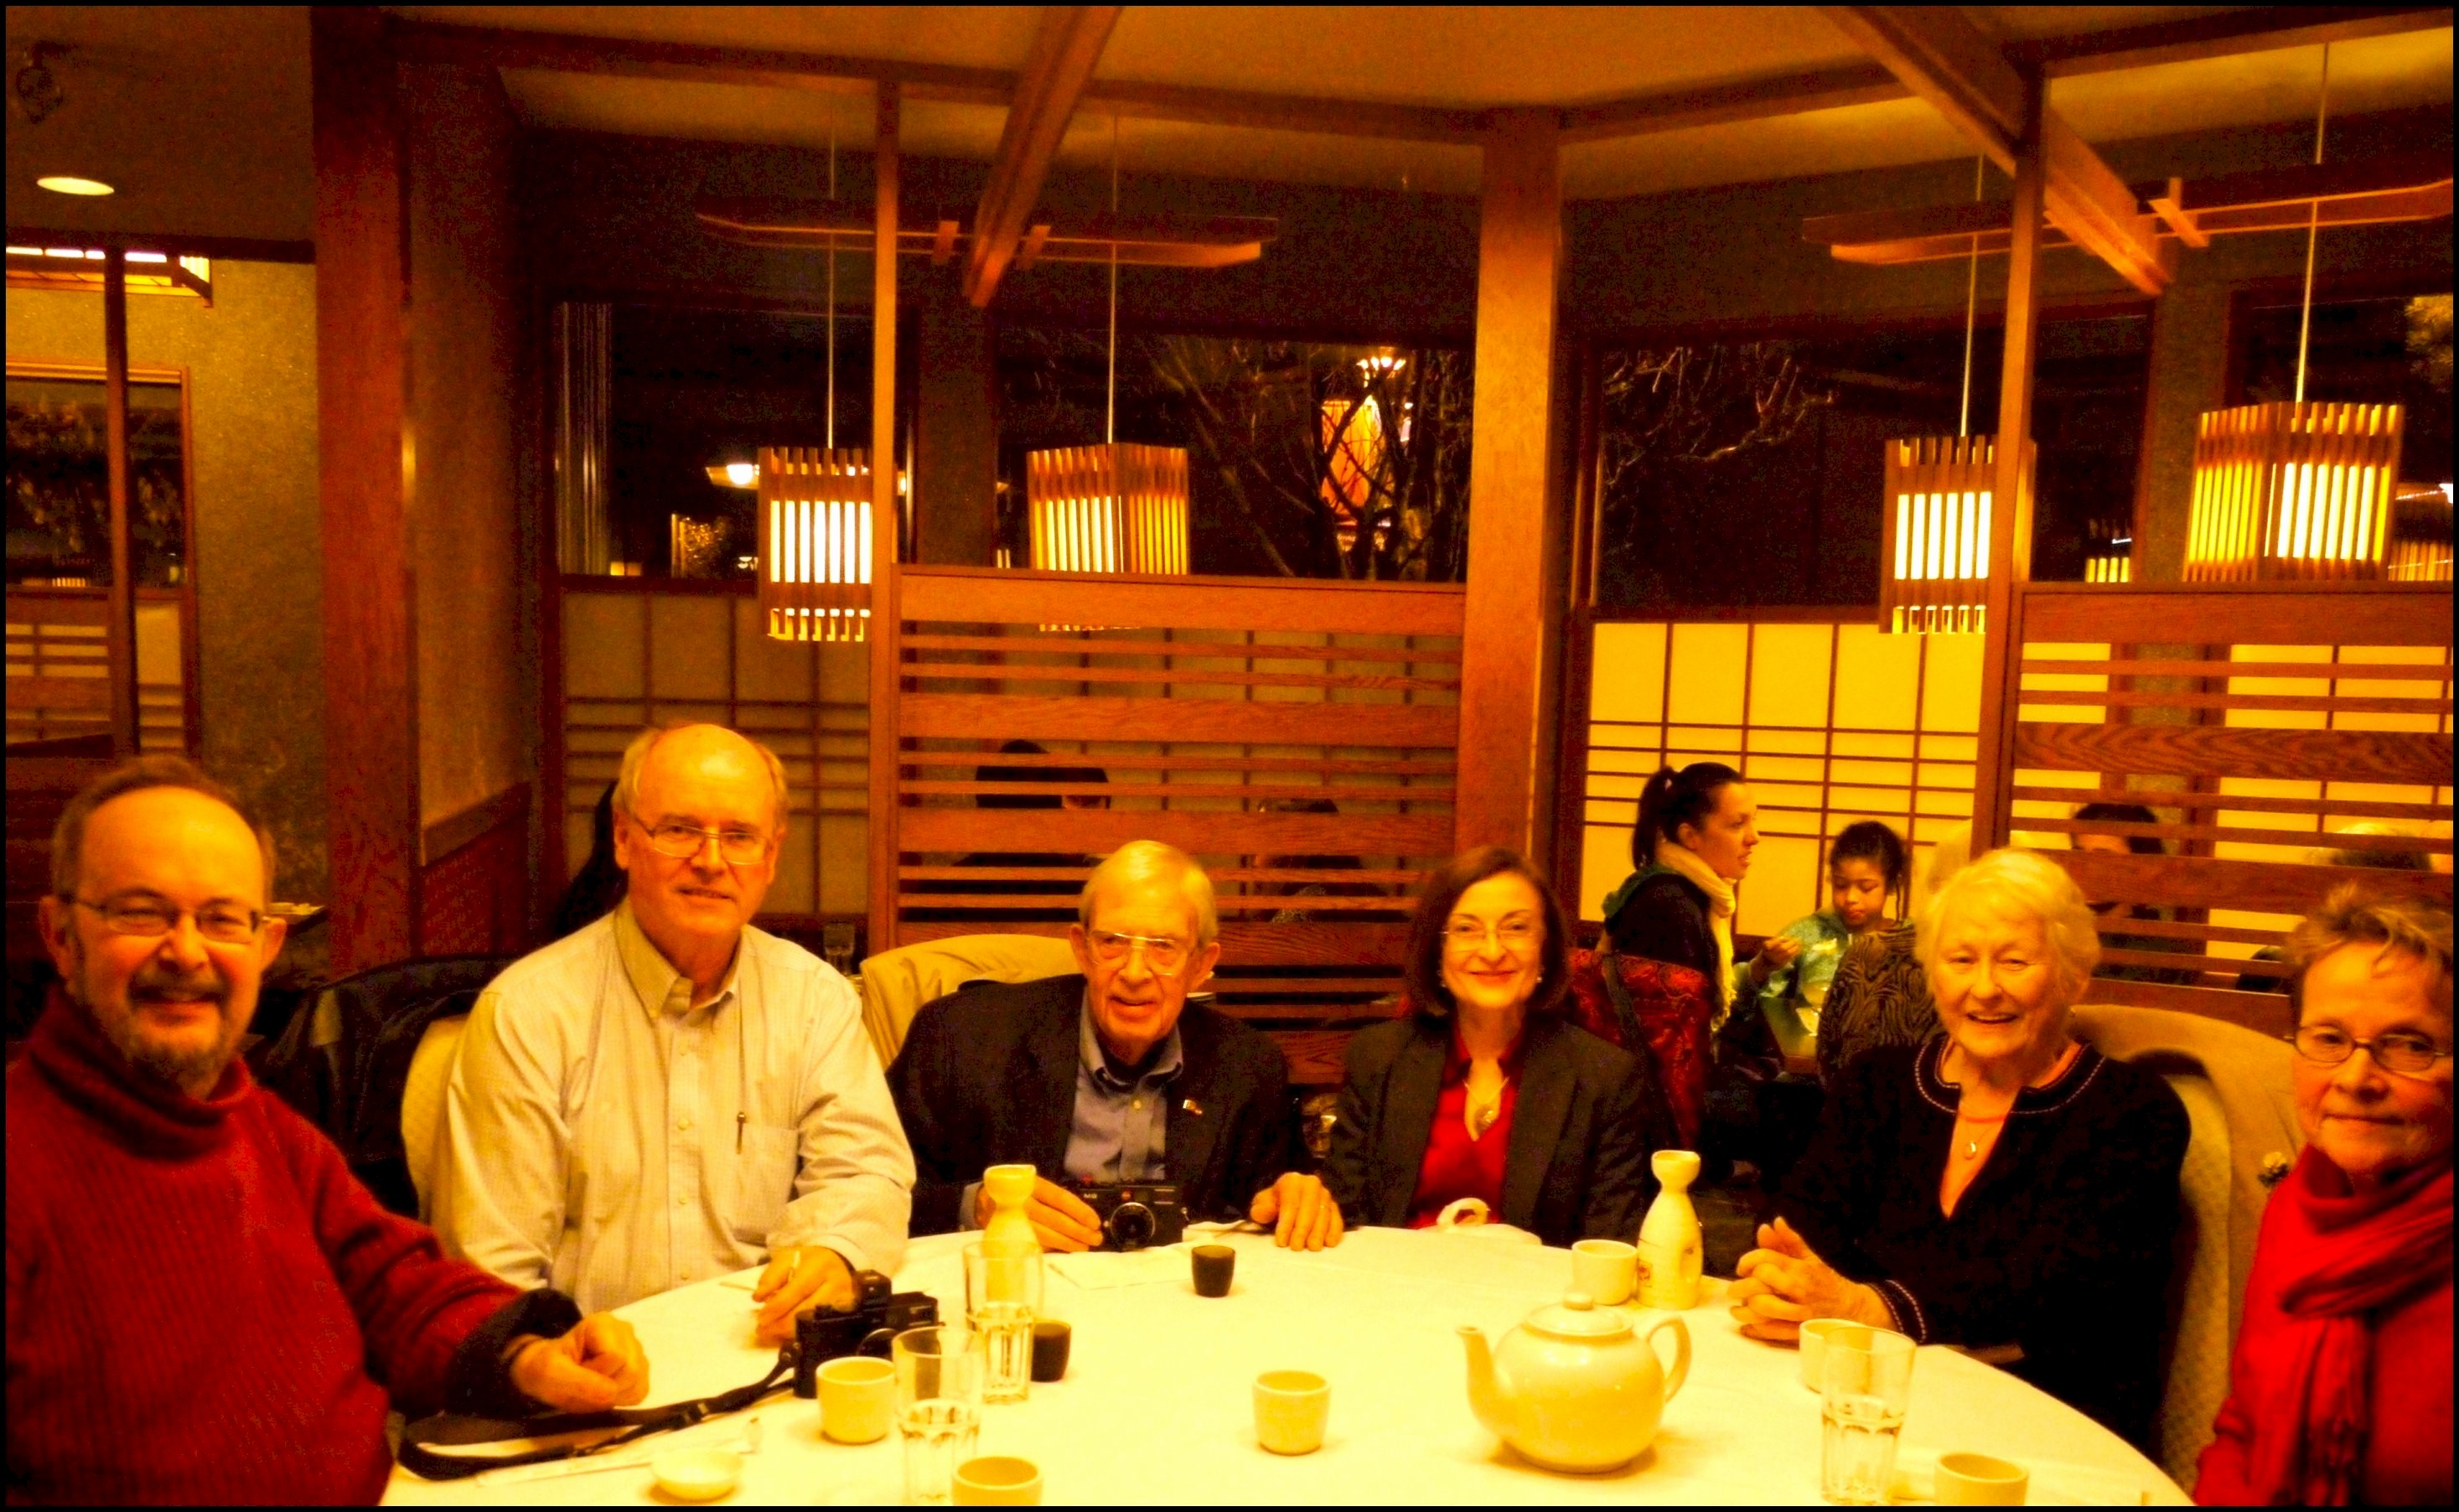 l to r  Tom Abrahamsson, Henning Wulff, Ted Grant, Tanya Wulff, Irene Grant, Tuulikki Abrahamsson